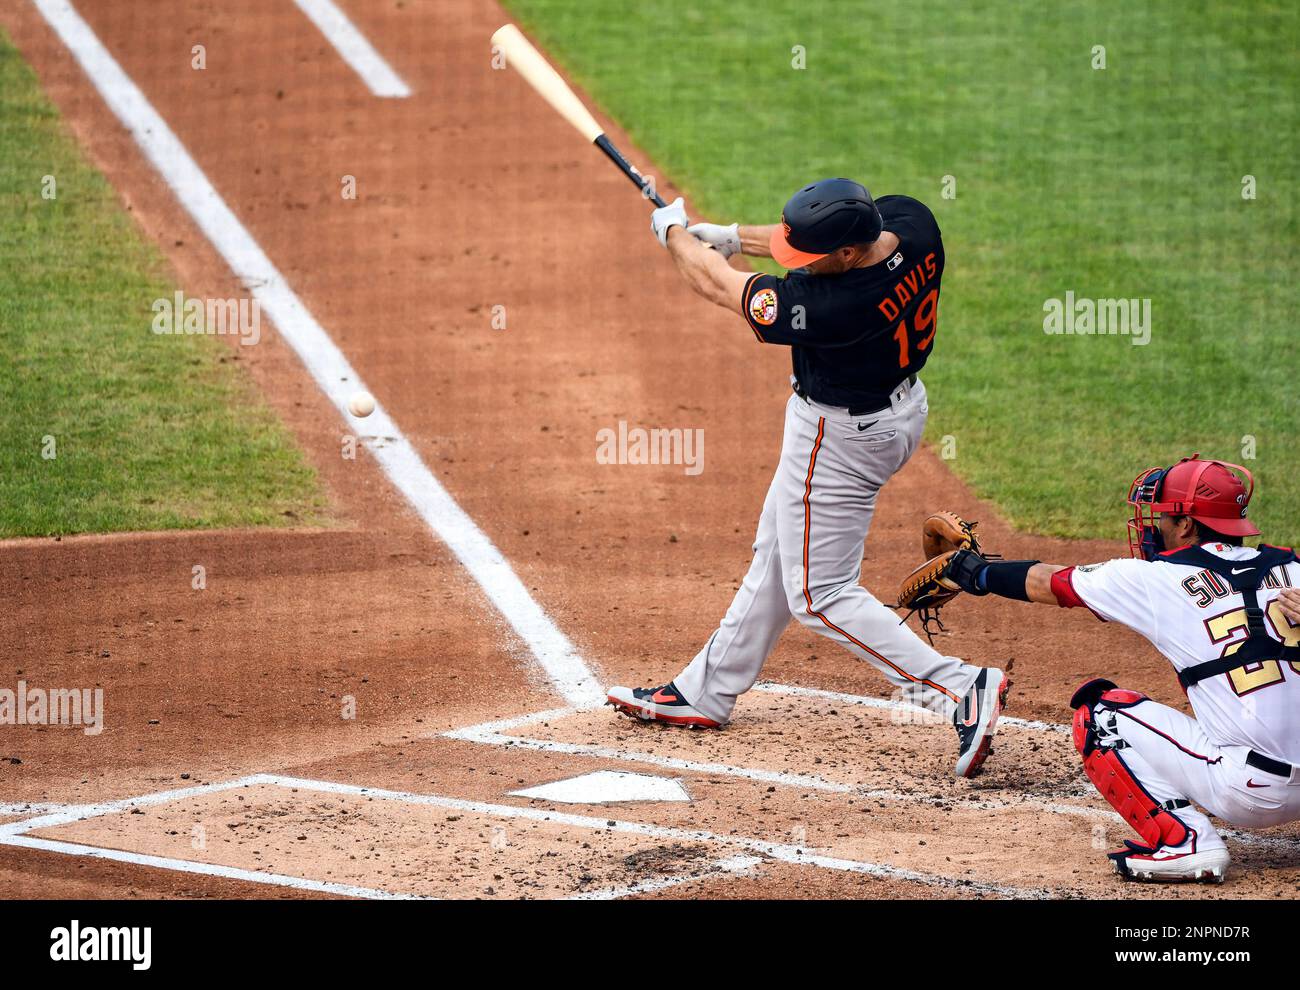 WASHINGTON, DC - AUGUST 07: Baltimore Orioles first baseman Chris Davis  (19) hits a double down the line during the game against the Washington  Nationals on August 7, 2020, at Nationals Park